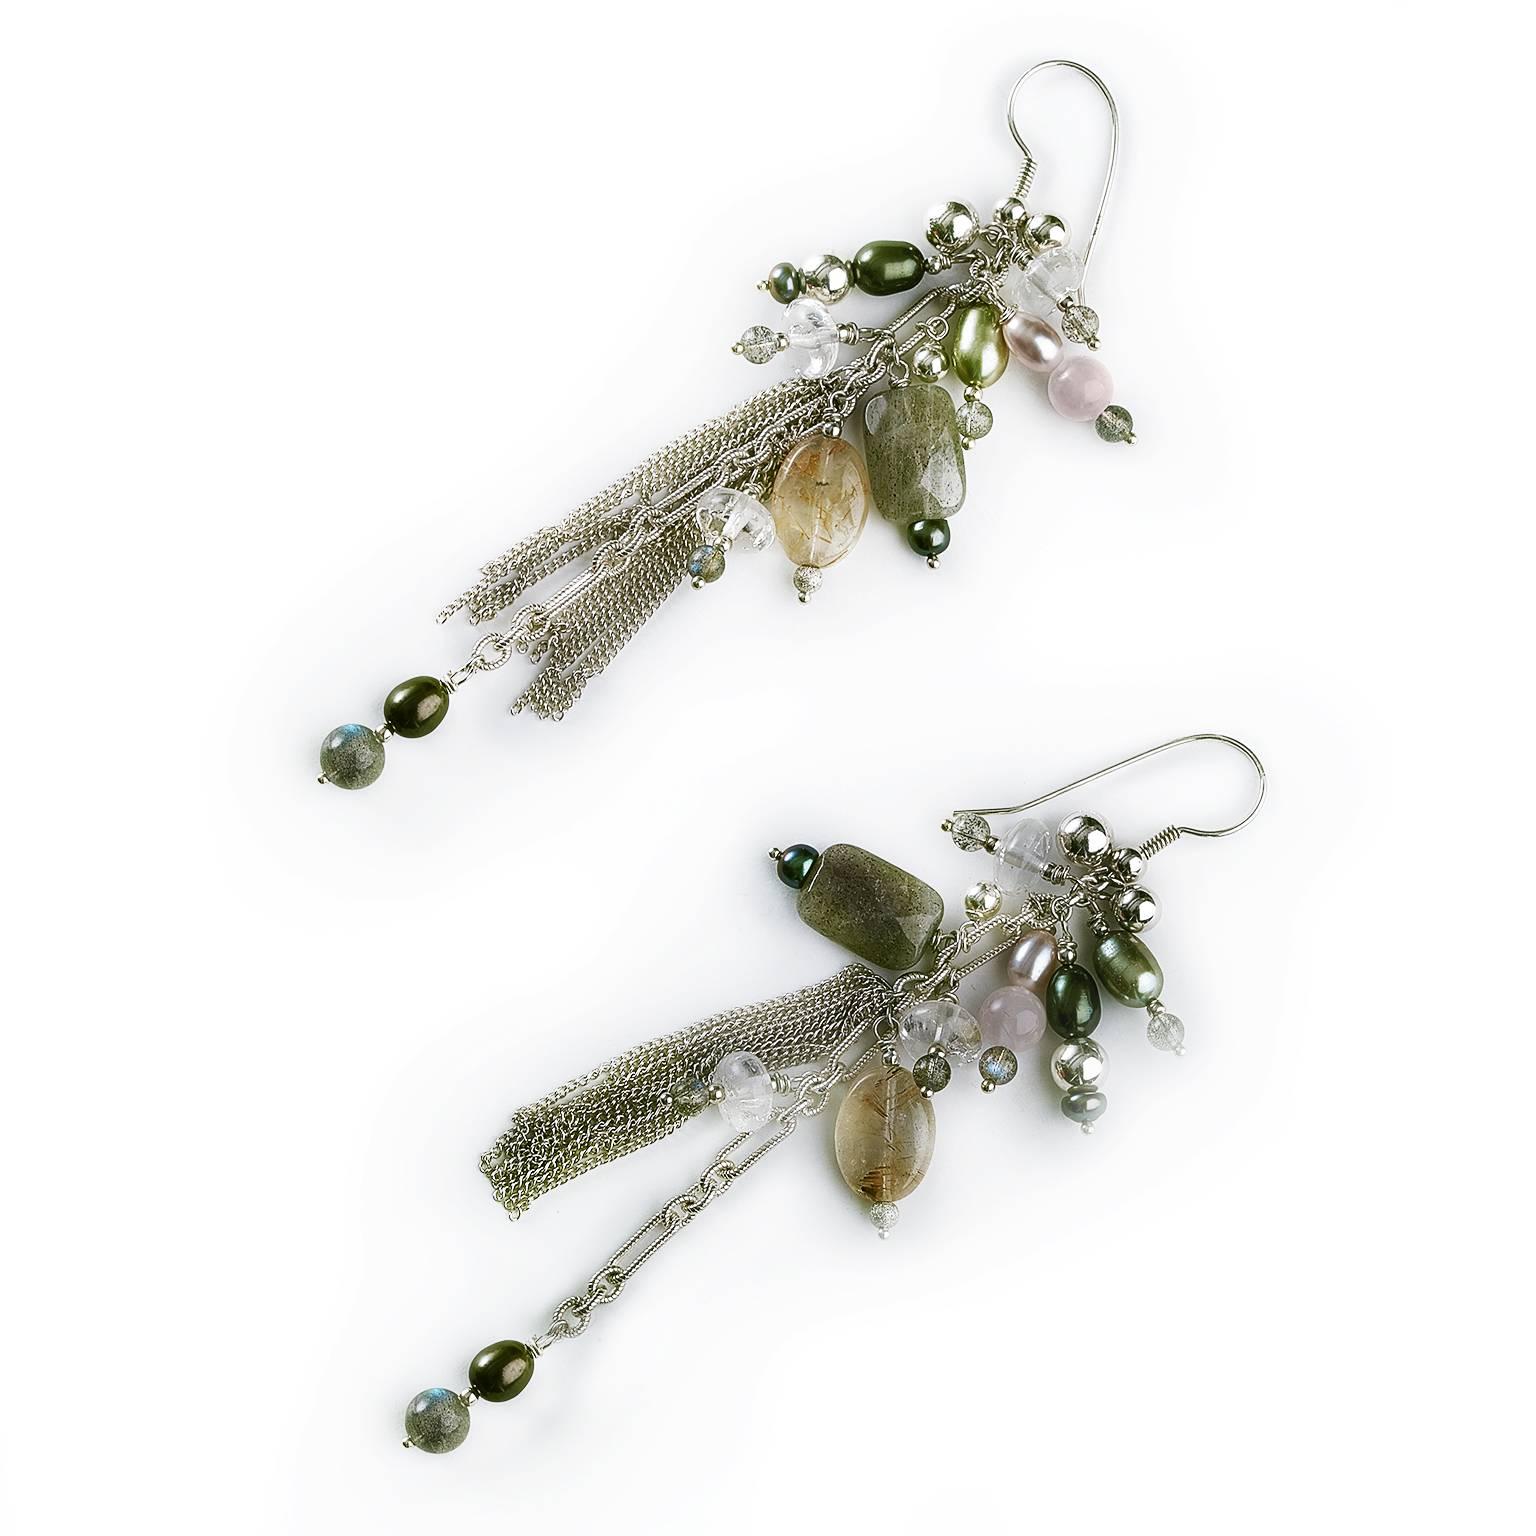 The beaded earrings composed in the sterling silver chain with playfully mixed labradorite rose and rutilated quartz, white quartz  roundels, accented multisize sterling silver beads and colored freshwater pearls, set on a silver hook wire. Have a